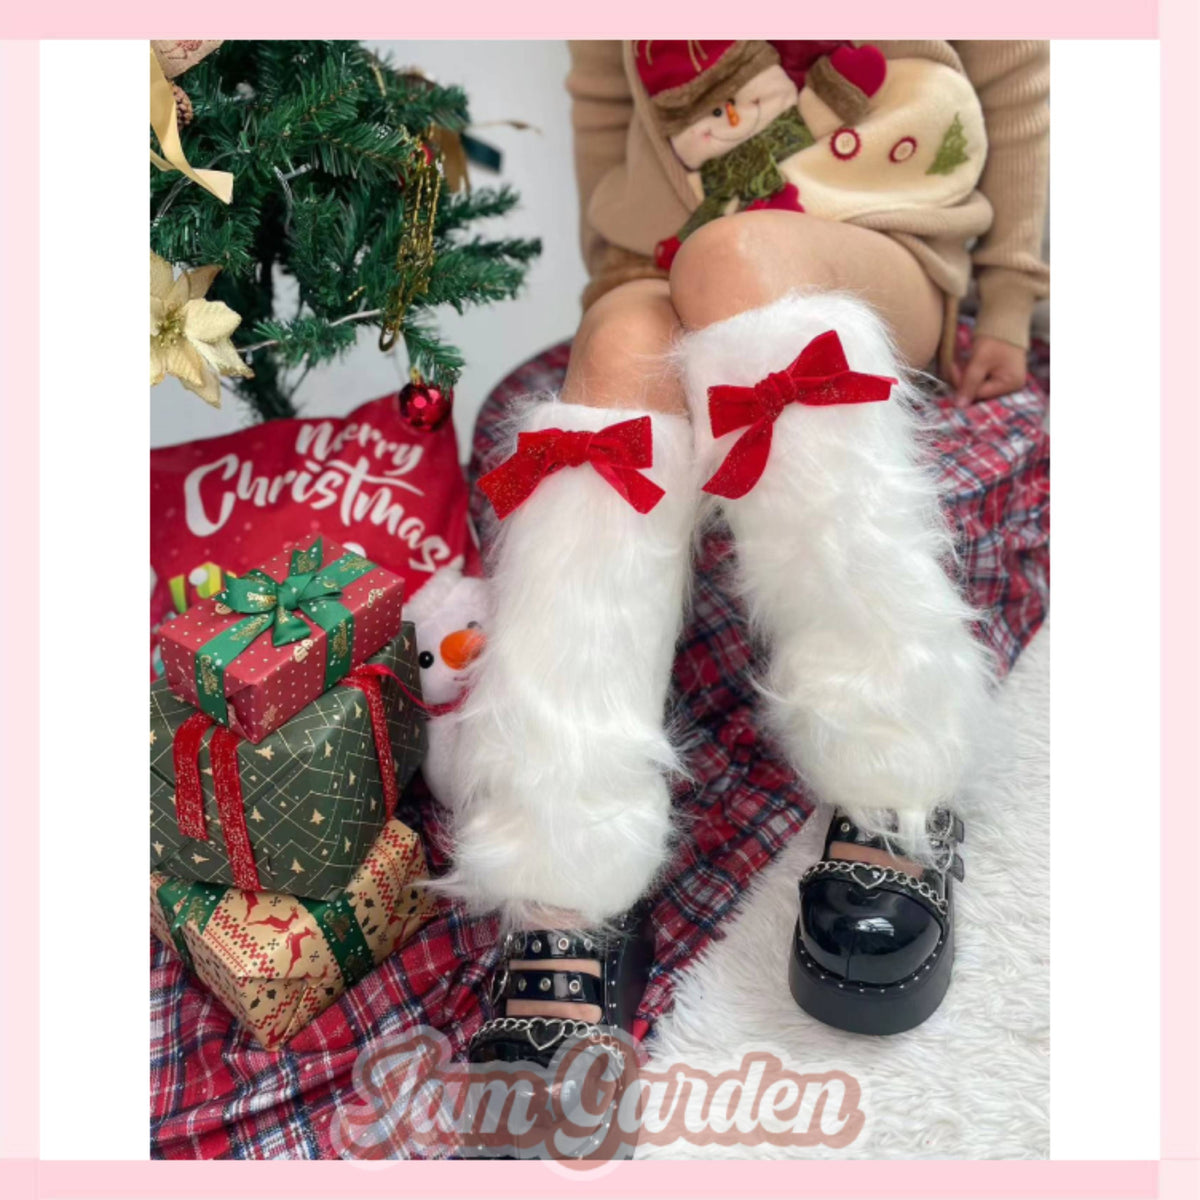 Christmas and New Year hottie bow leg warmers subculture mid-calf socks